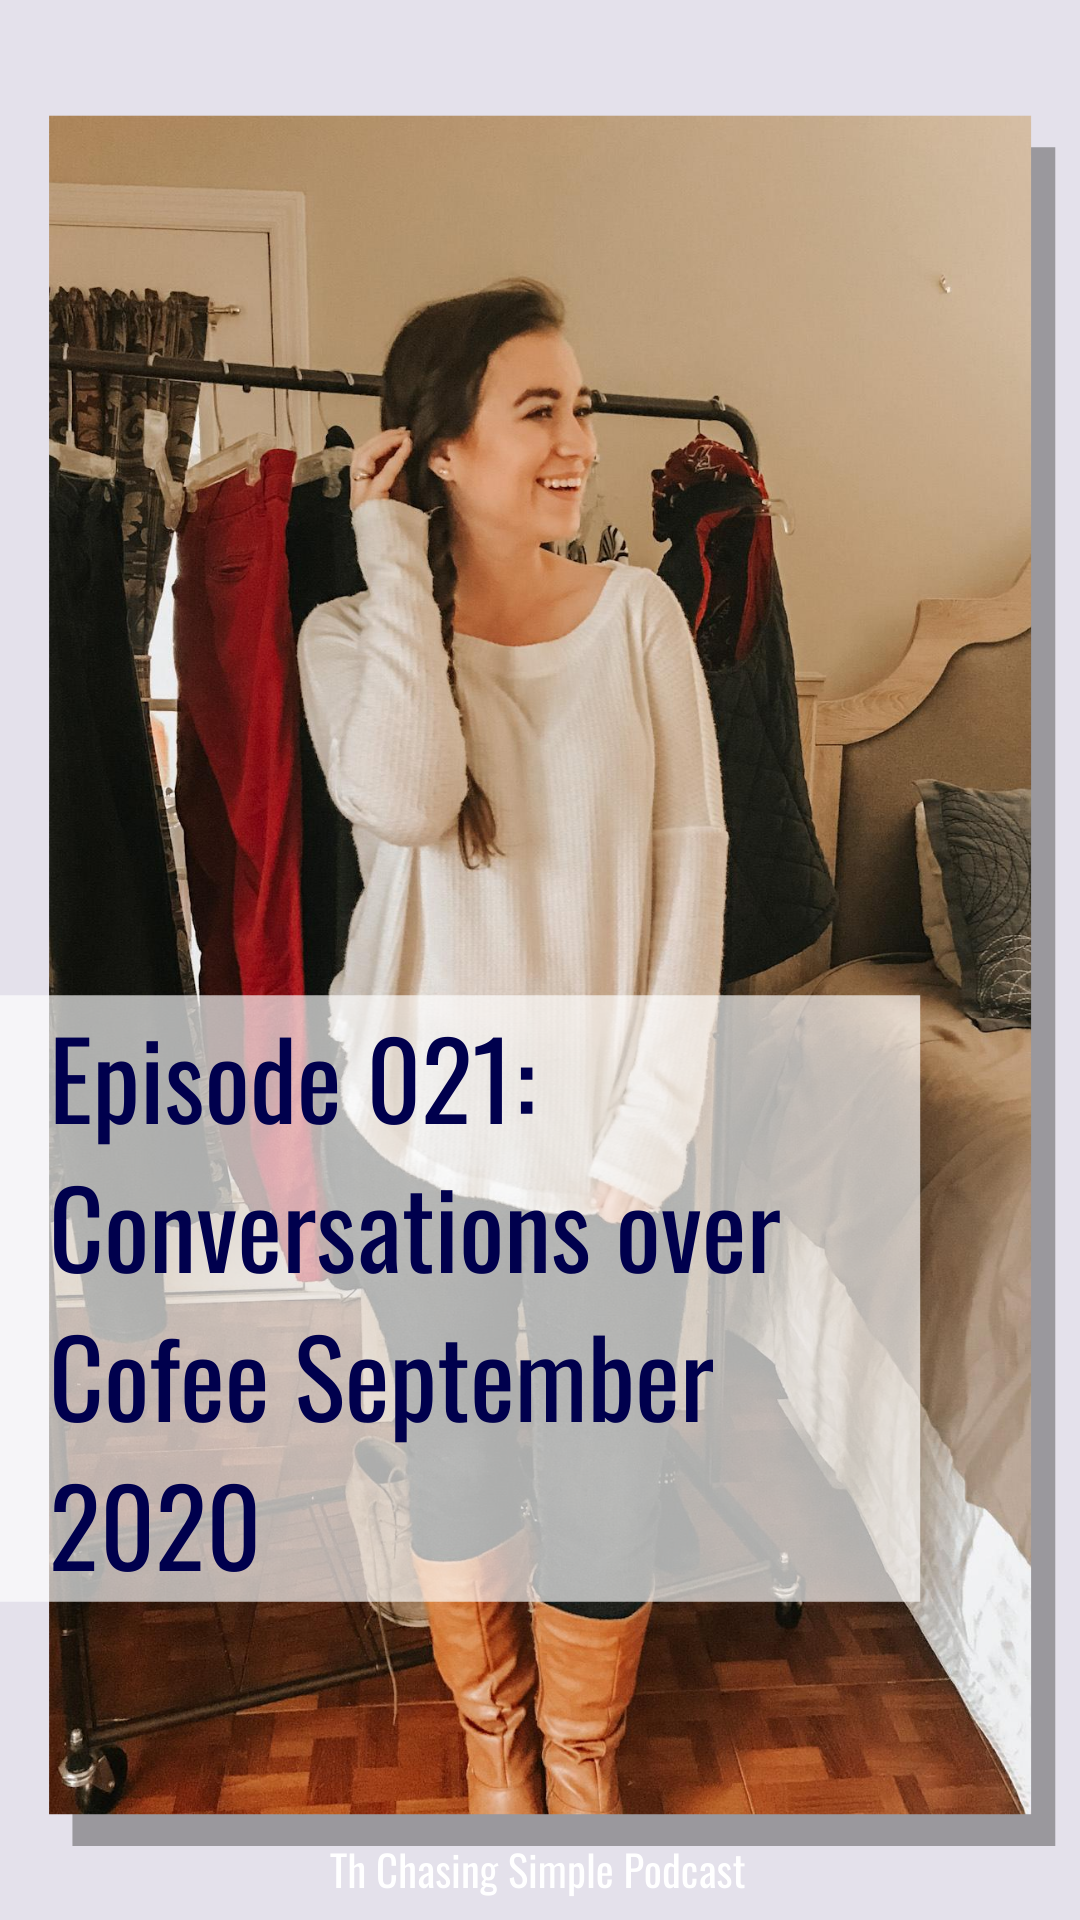 I'm back with another conversations over coffee check-in to share what's been happening behind the scenes over the last few months!